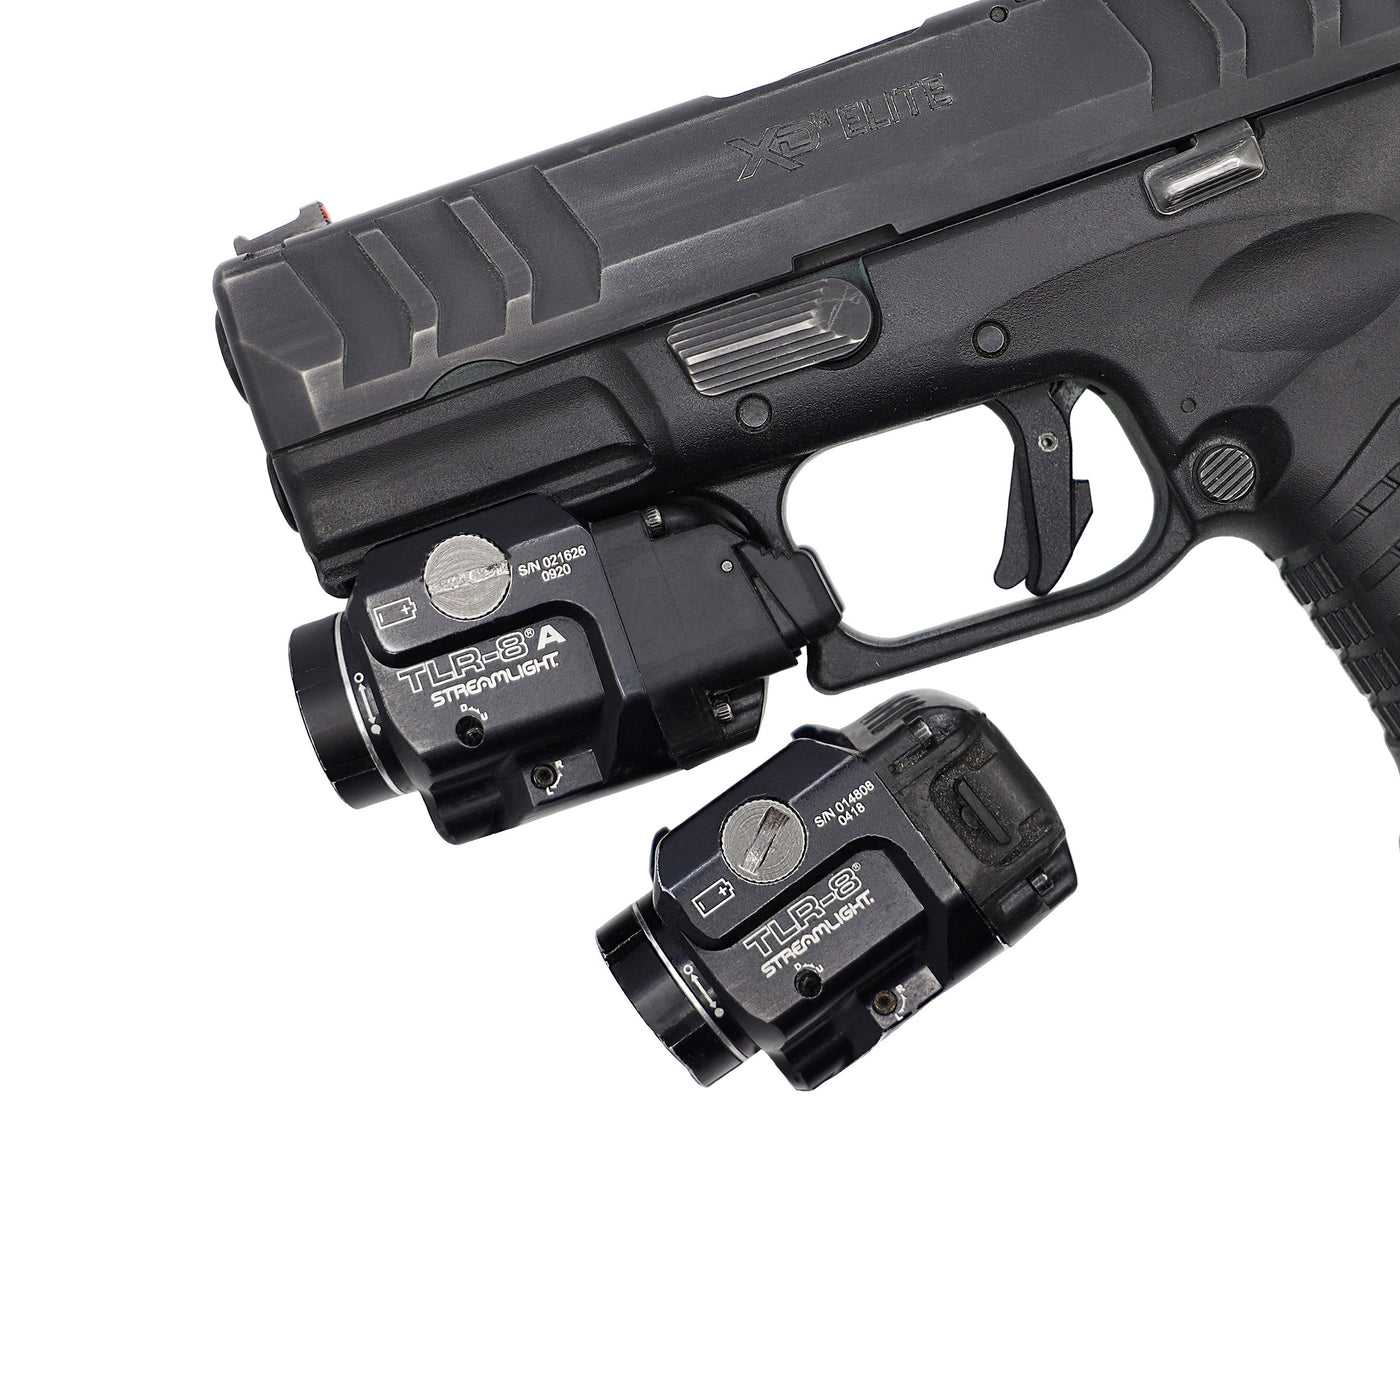 Springfield XDM firearm with streamlight TLR8 weapon light